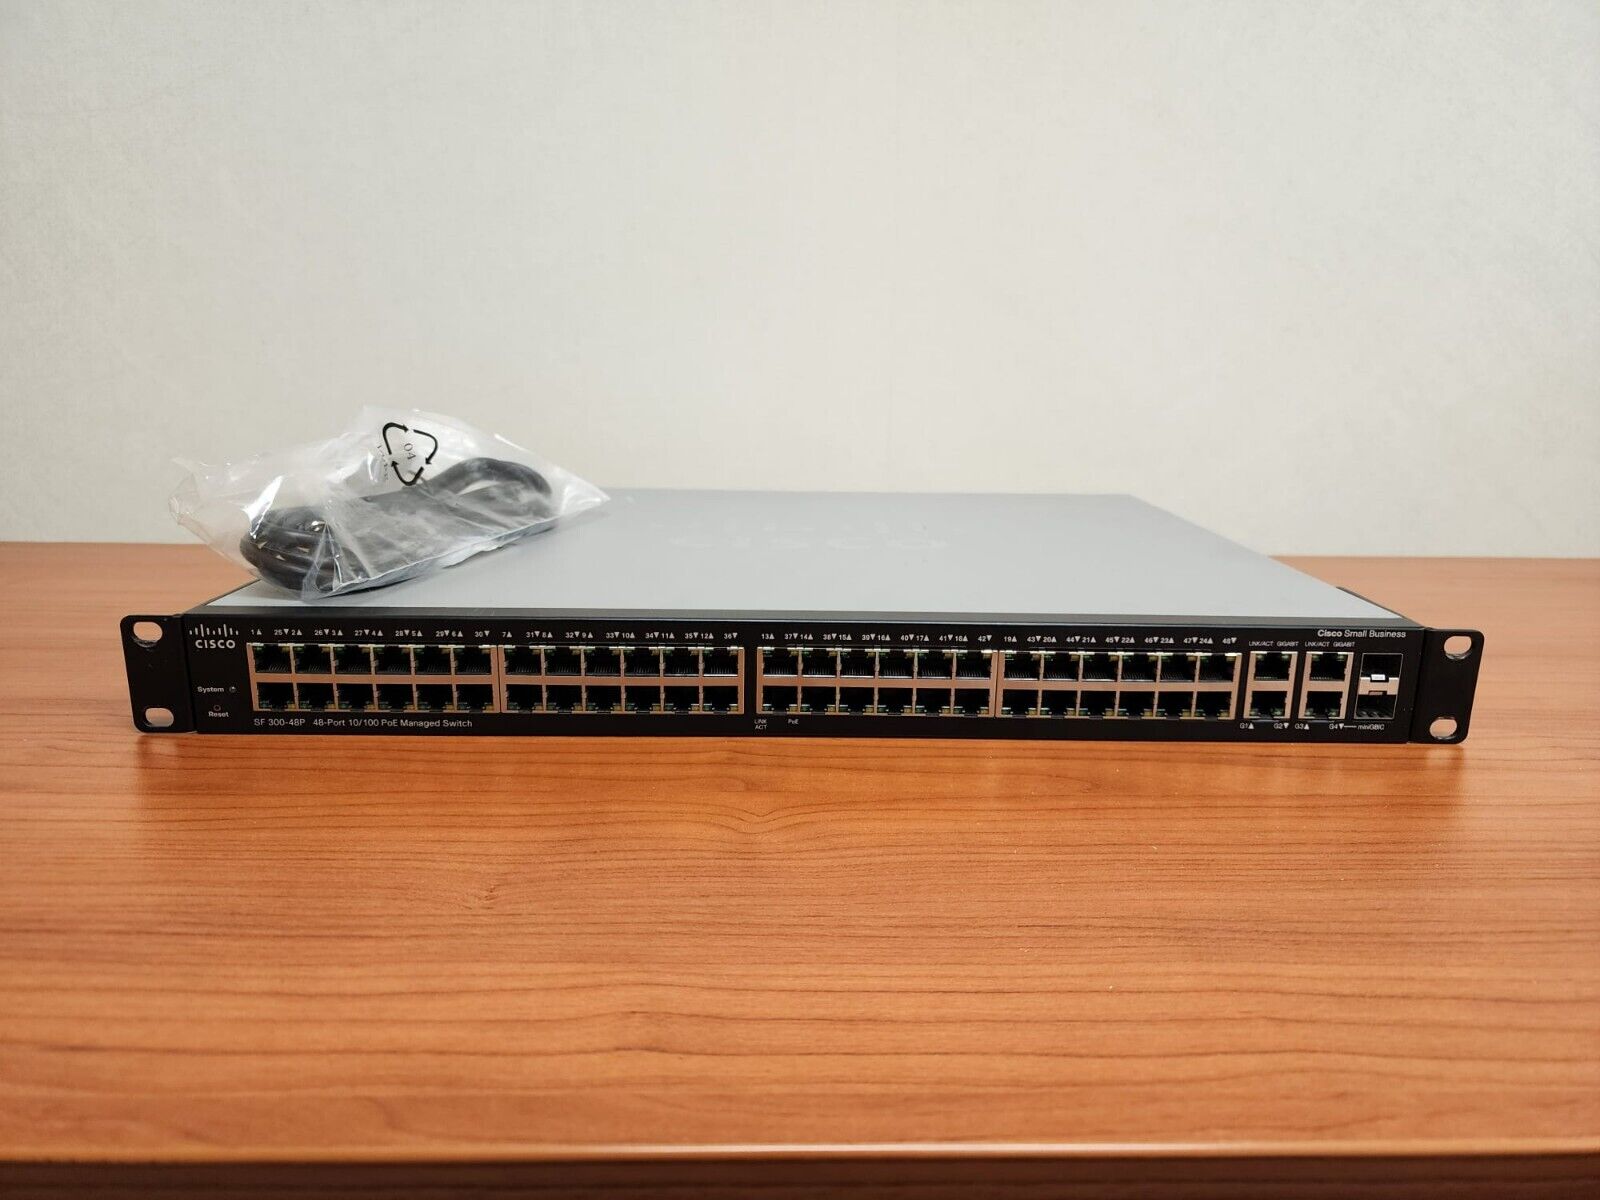 SF300-48P - Cisco Small Business 300 Series Managed Switch